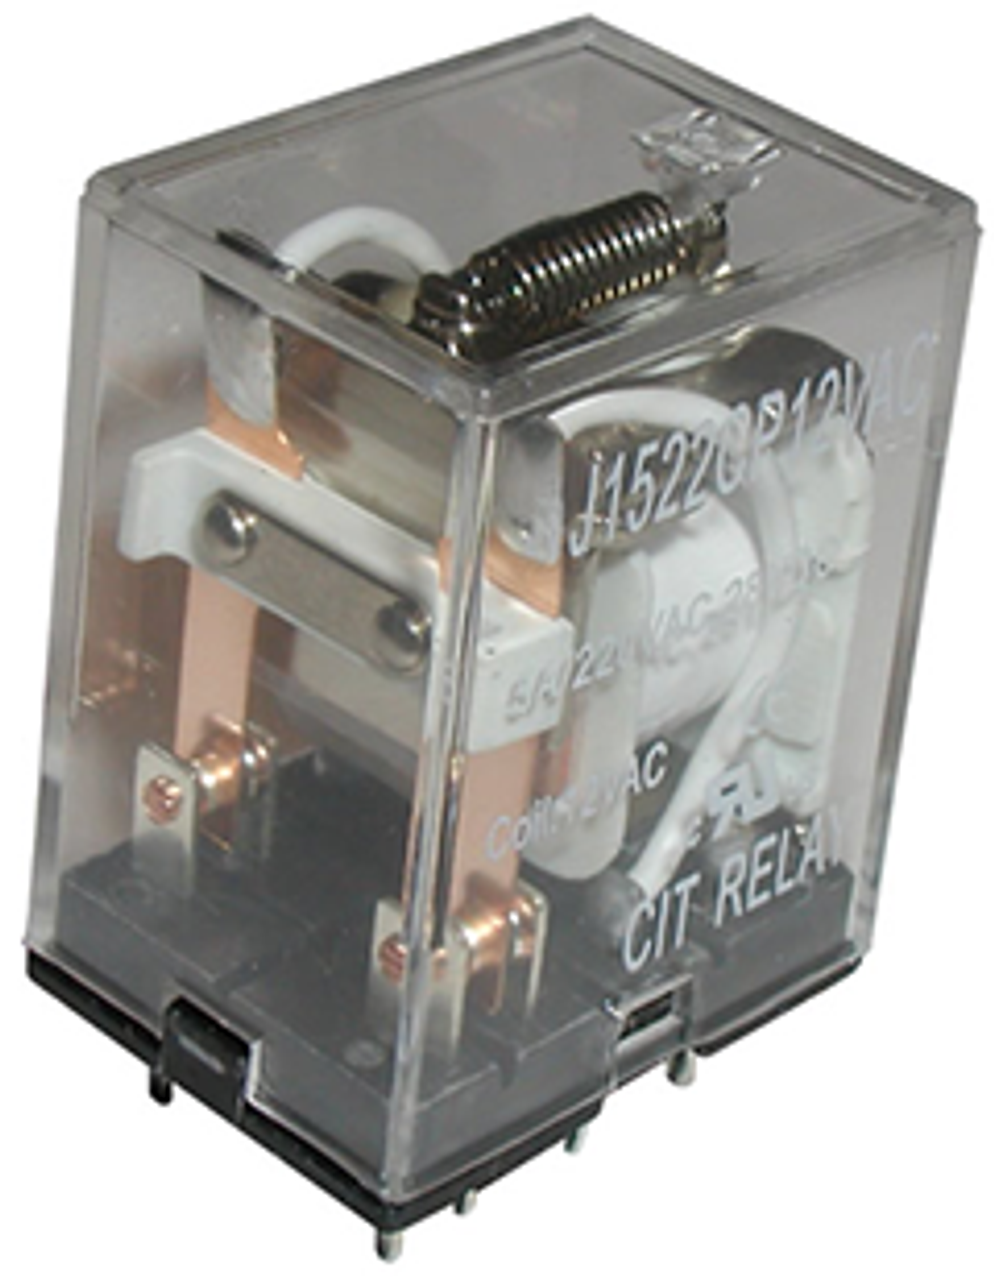 CIT Relay and Switch J1522CF220VACT Industrial Relays